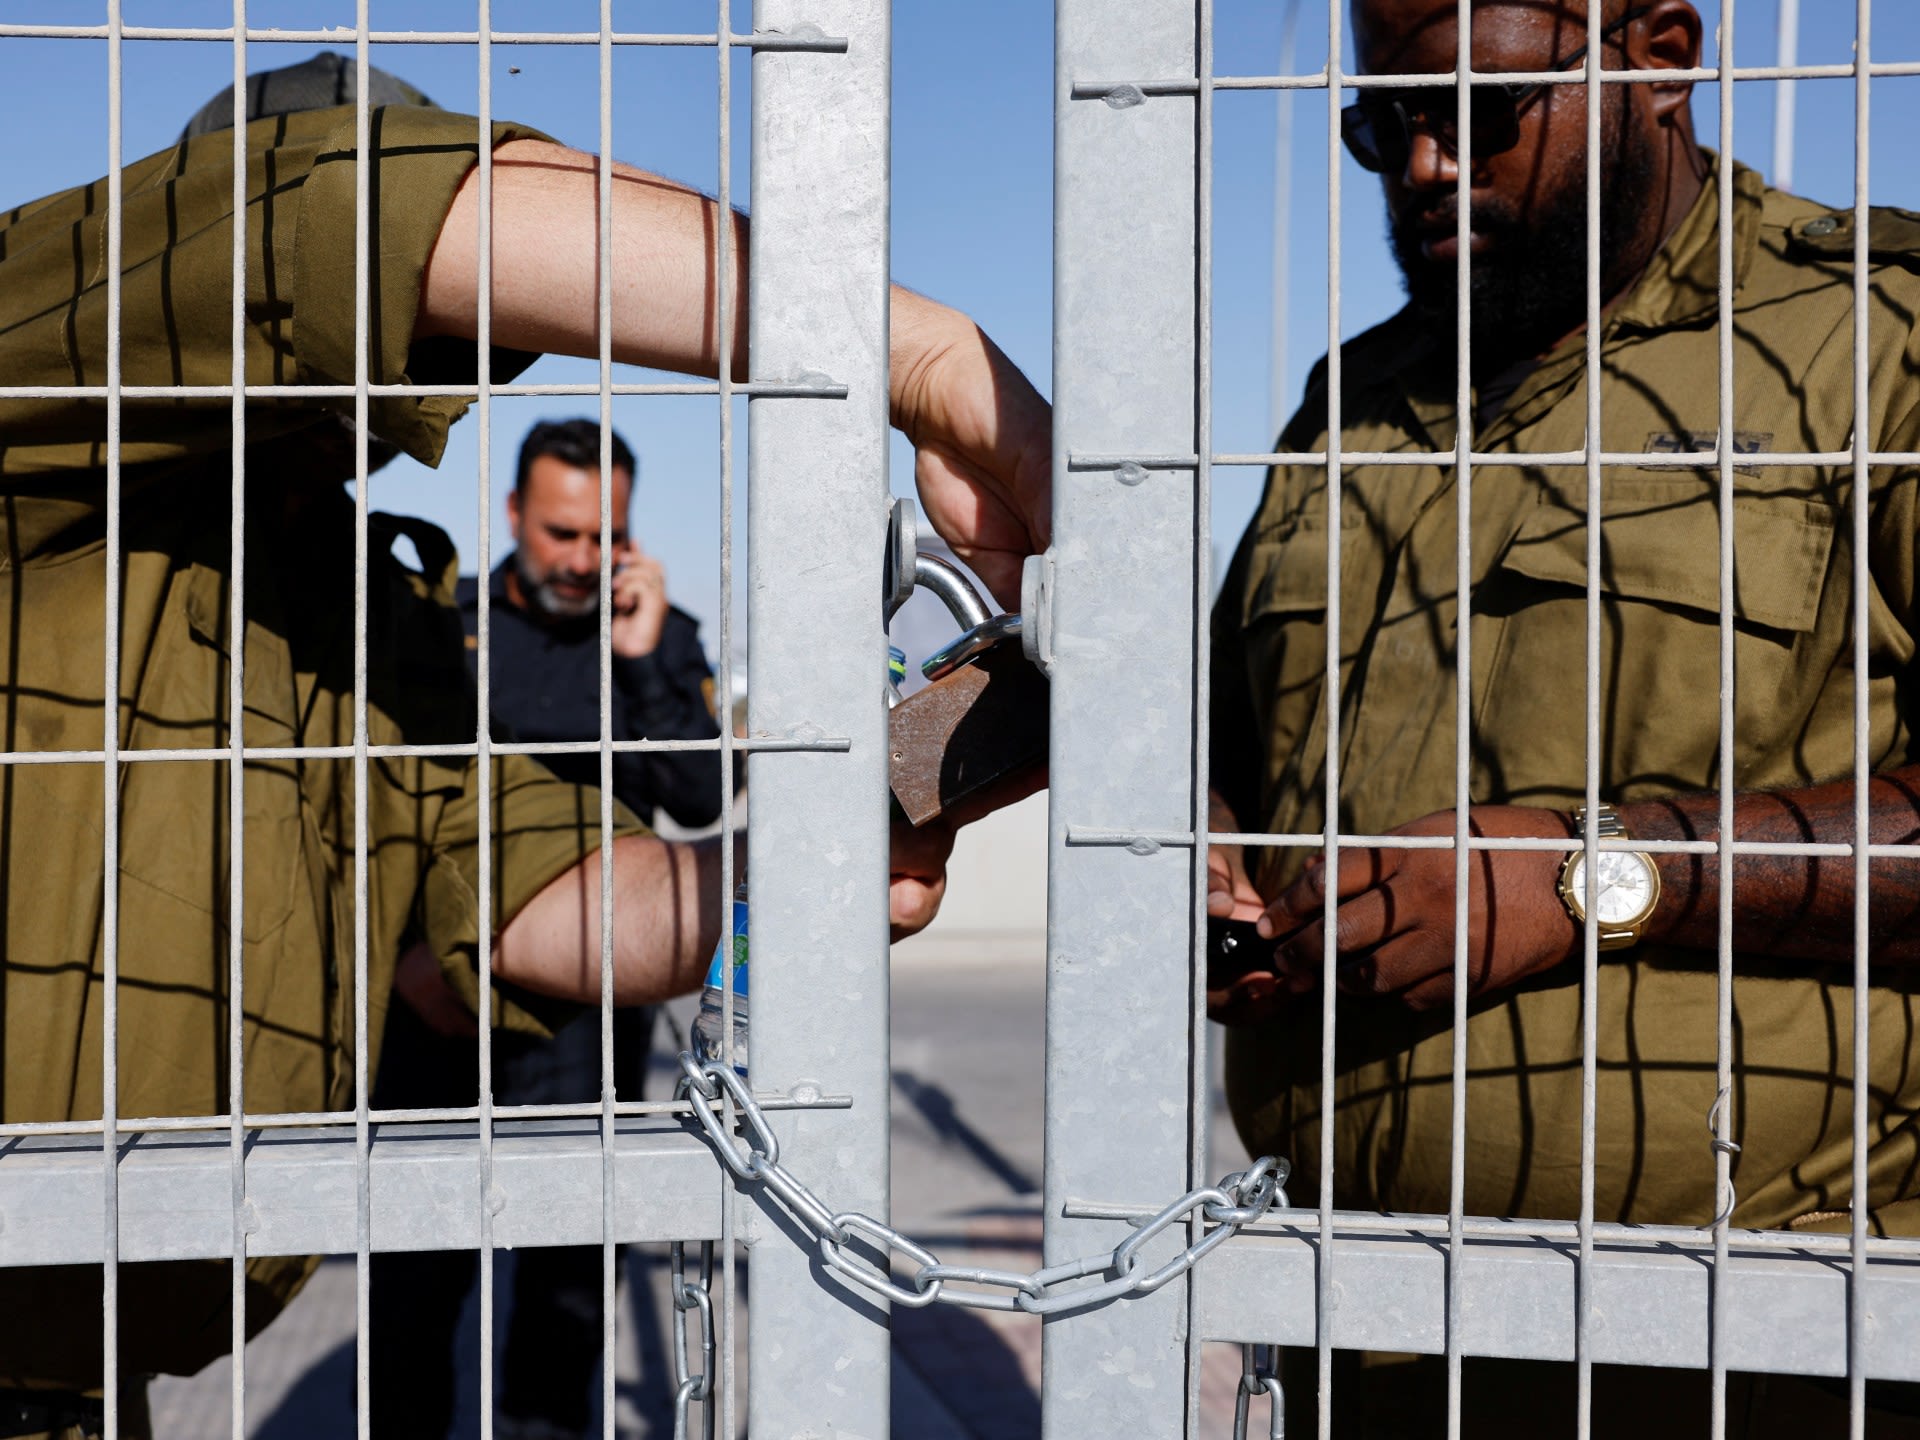 Israel subjecting Palestinian detainees to torture and abuse: UN report